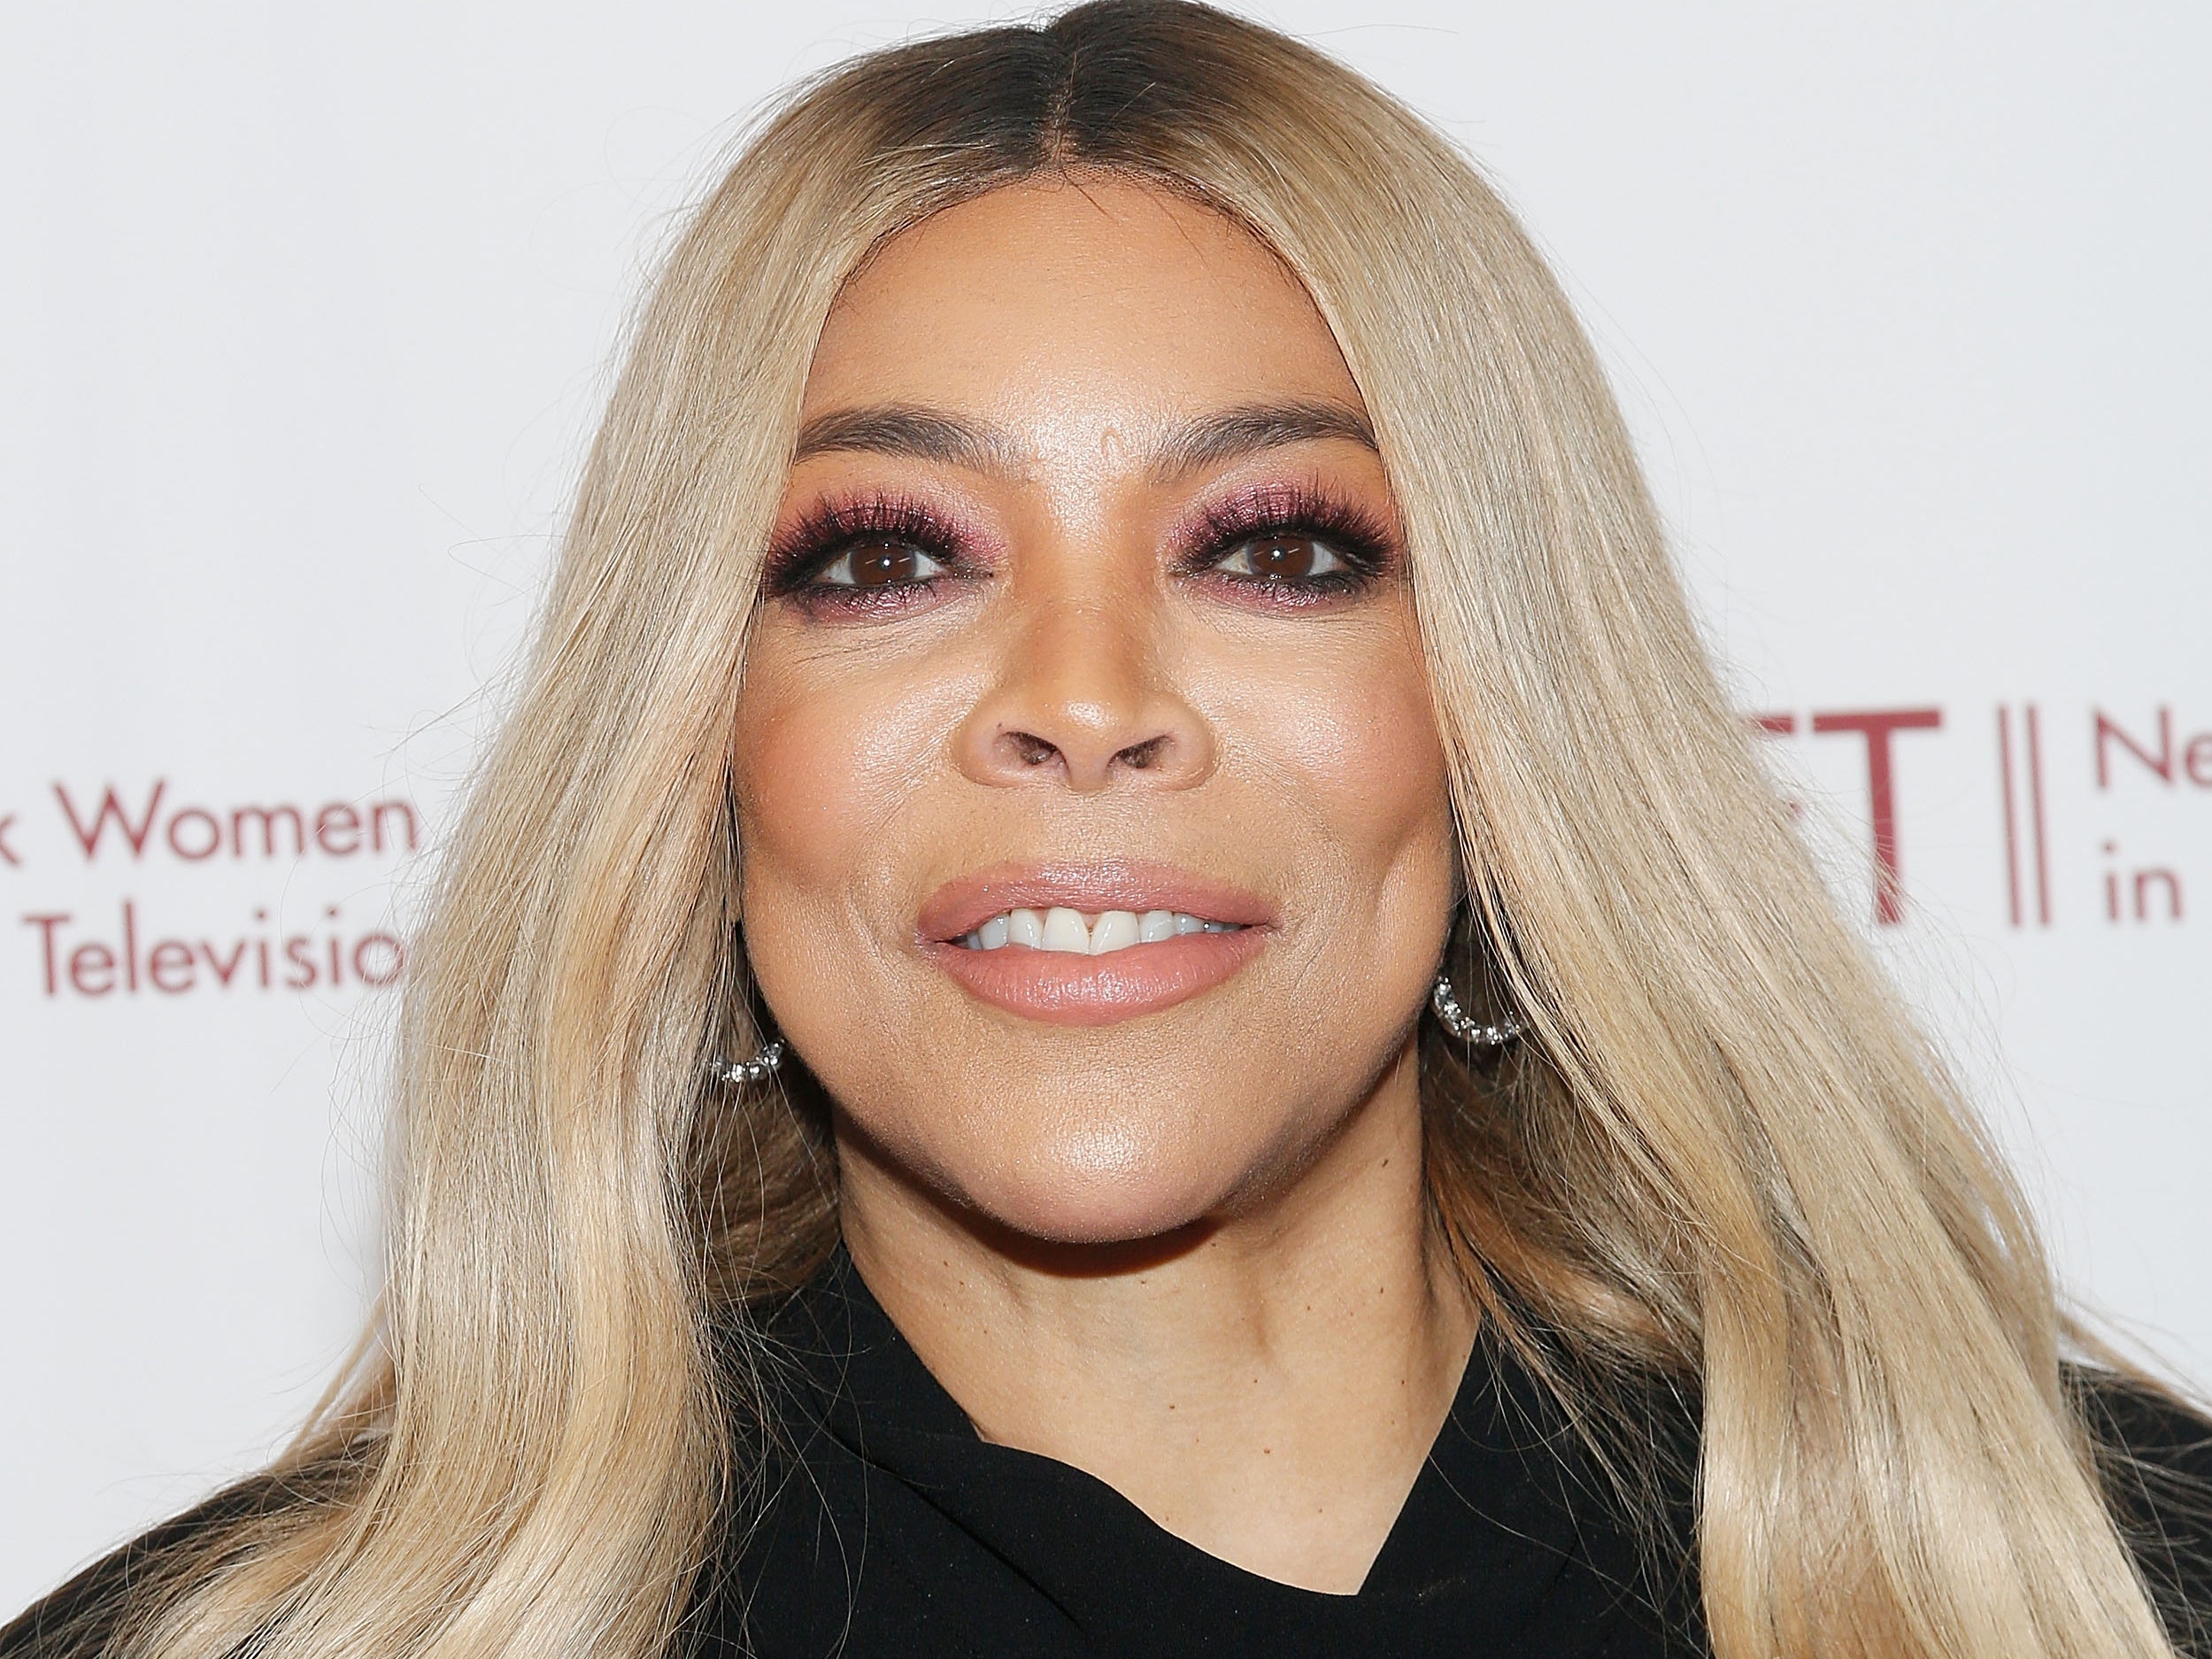 Wendy Williams American Broadcaster, Actress, Writer